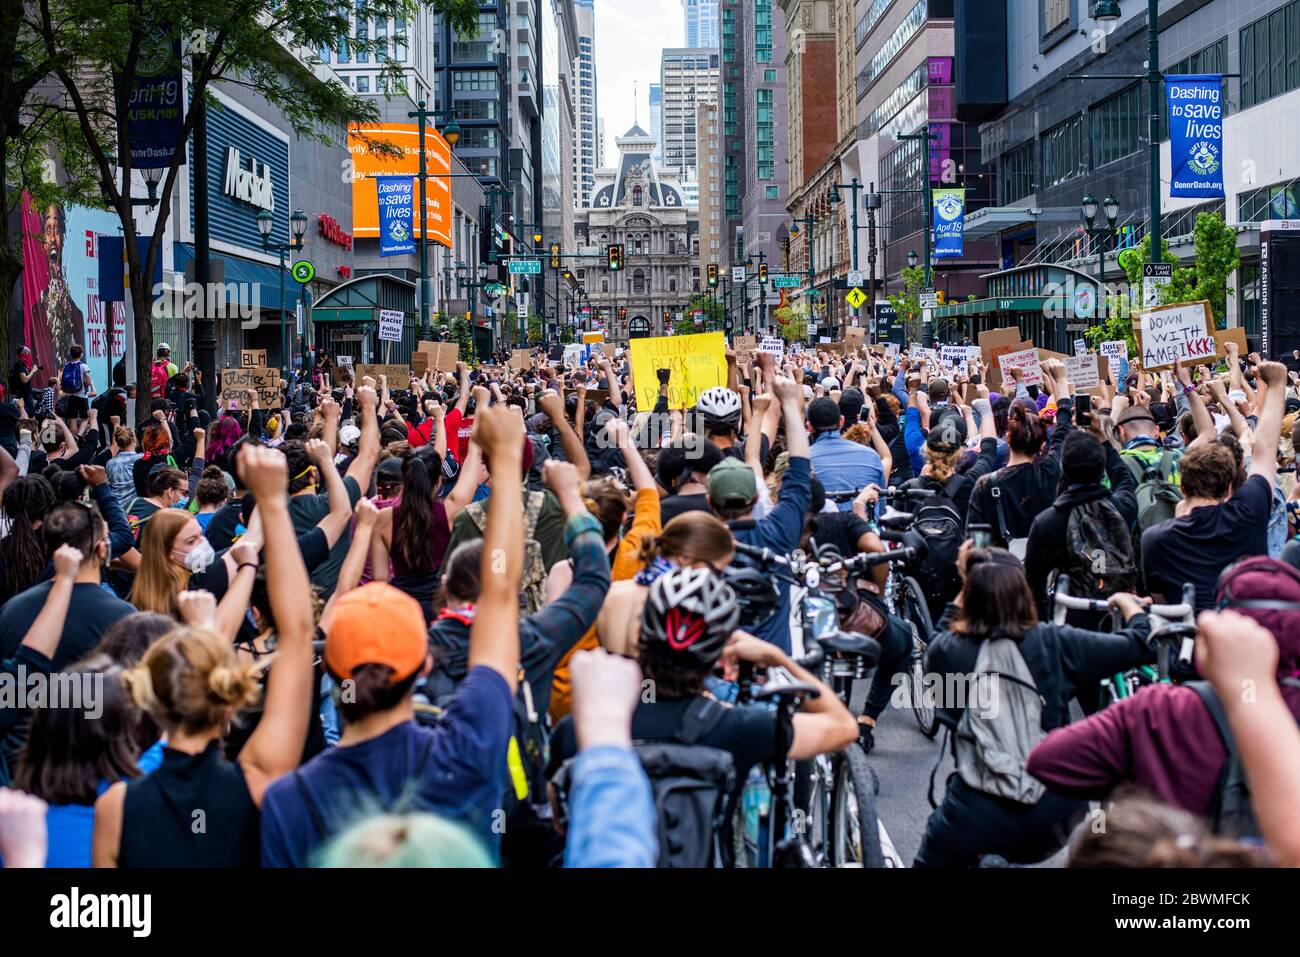 Philadelphia, Pennsylvania / USA. Thousands of people marched through center city Philadelphia calling for an end to police brutality, the defunding of the Philadelphia Police Department in favor of essential social services that address historic and underlying injustices for black and brown communityes and working class and poor communities. June 01, 2020. Credit: Christopher Evens/Alamy Live News Stock Photo